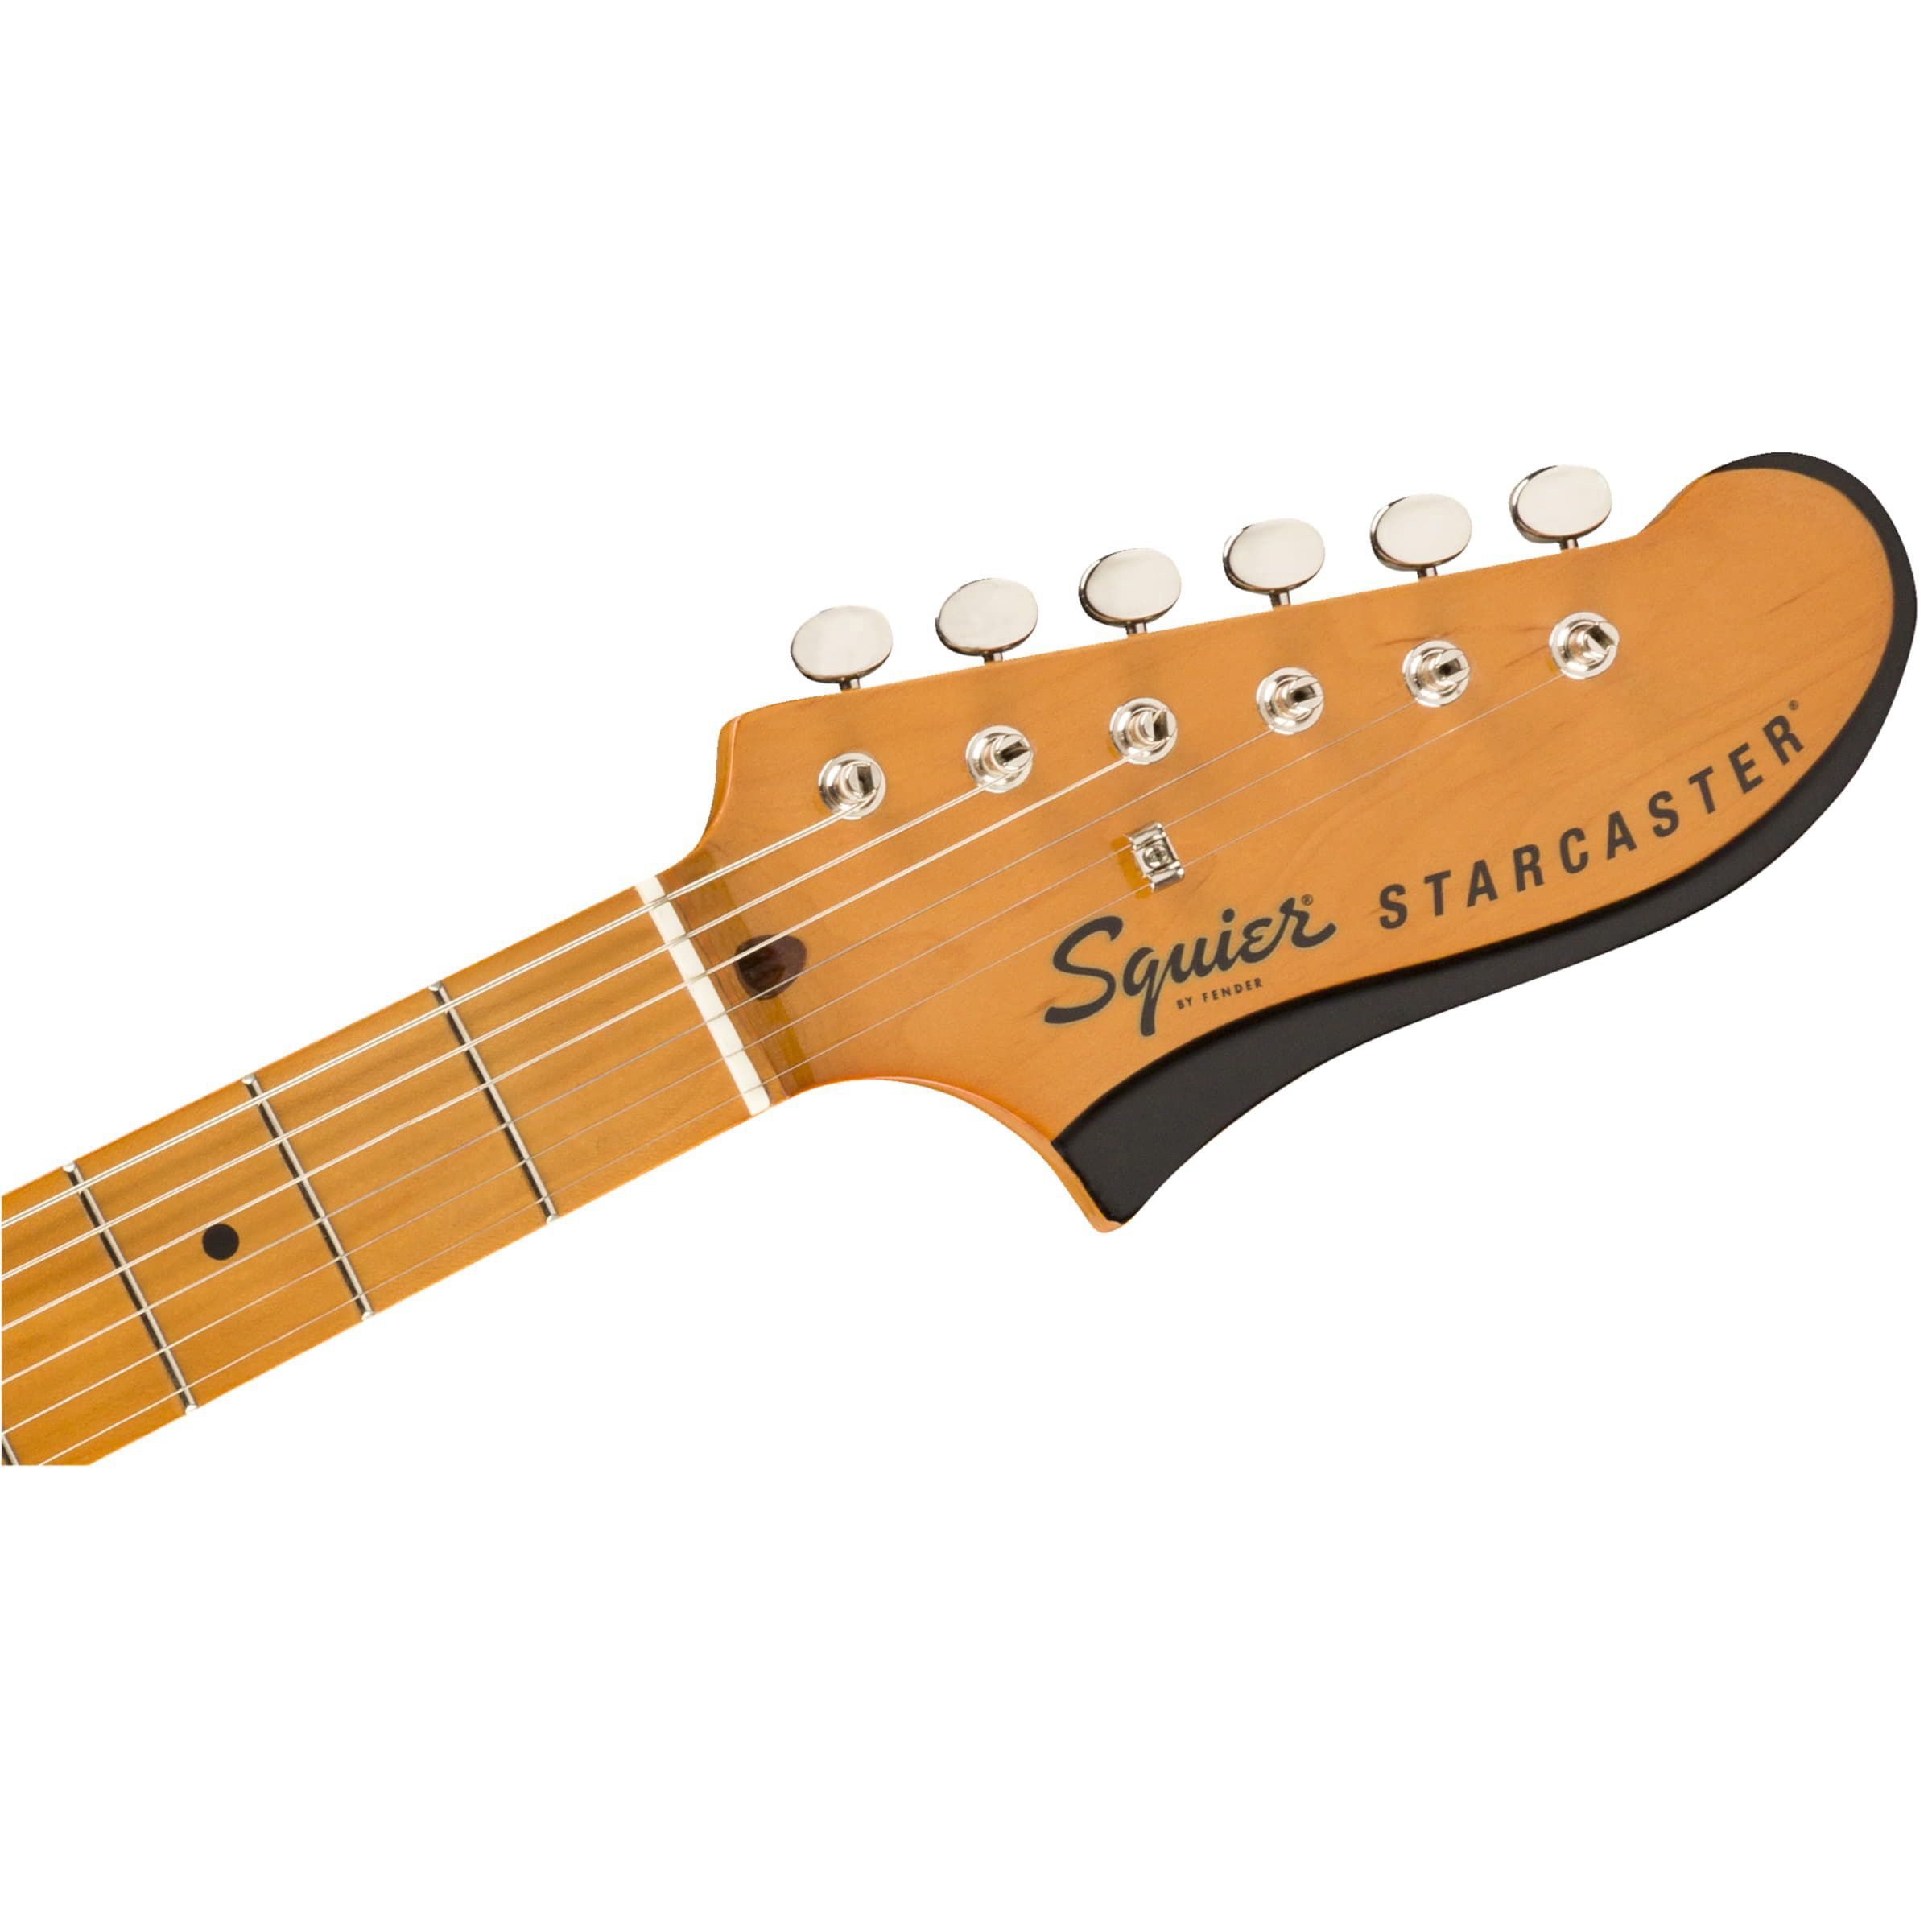 Fender Squier Classic Vibe Starcaster MN 3TS Электрогитары